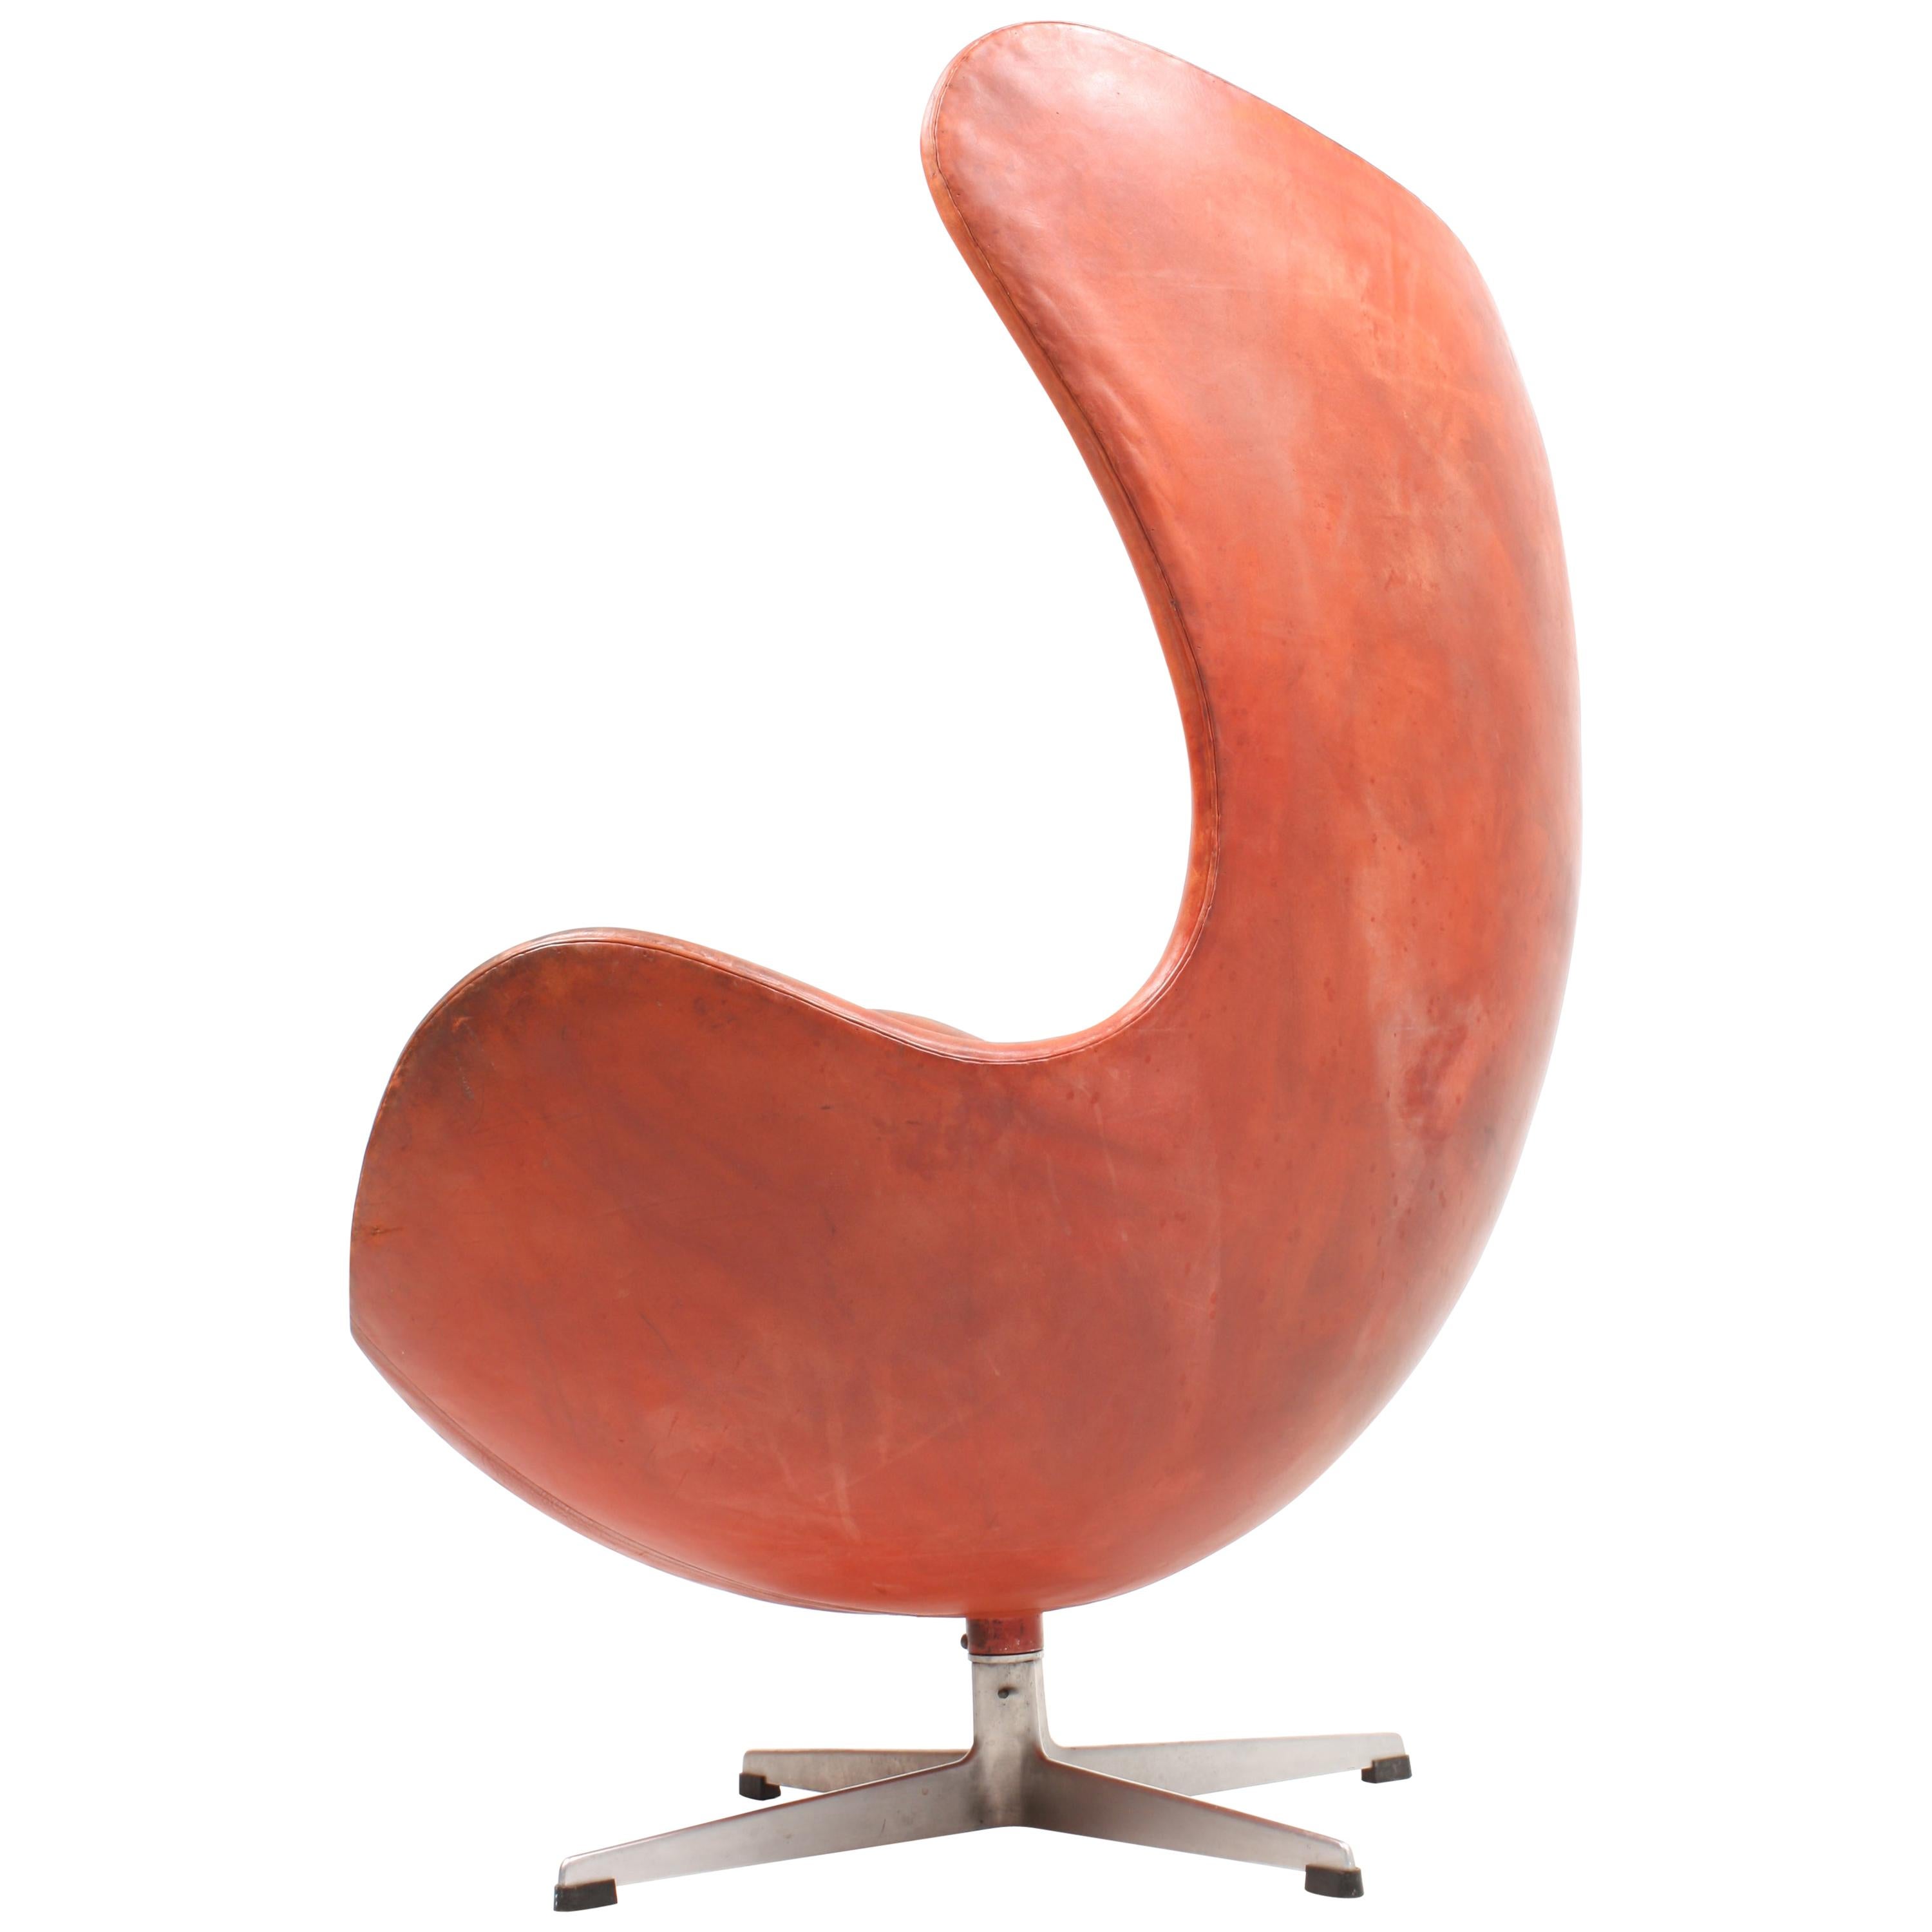 Midcentury Egg Chair in Patinated Leather by Arne Jacobsen, Danish, 1960s